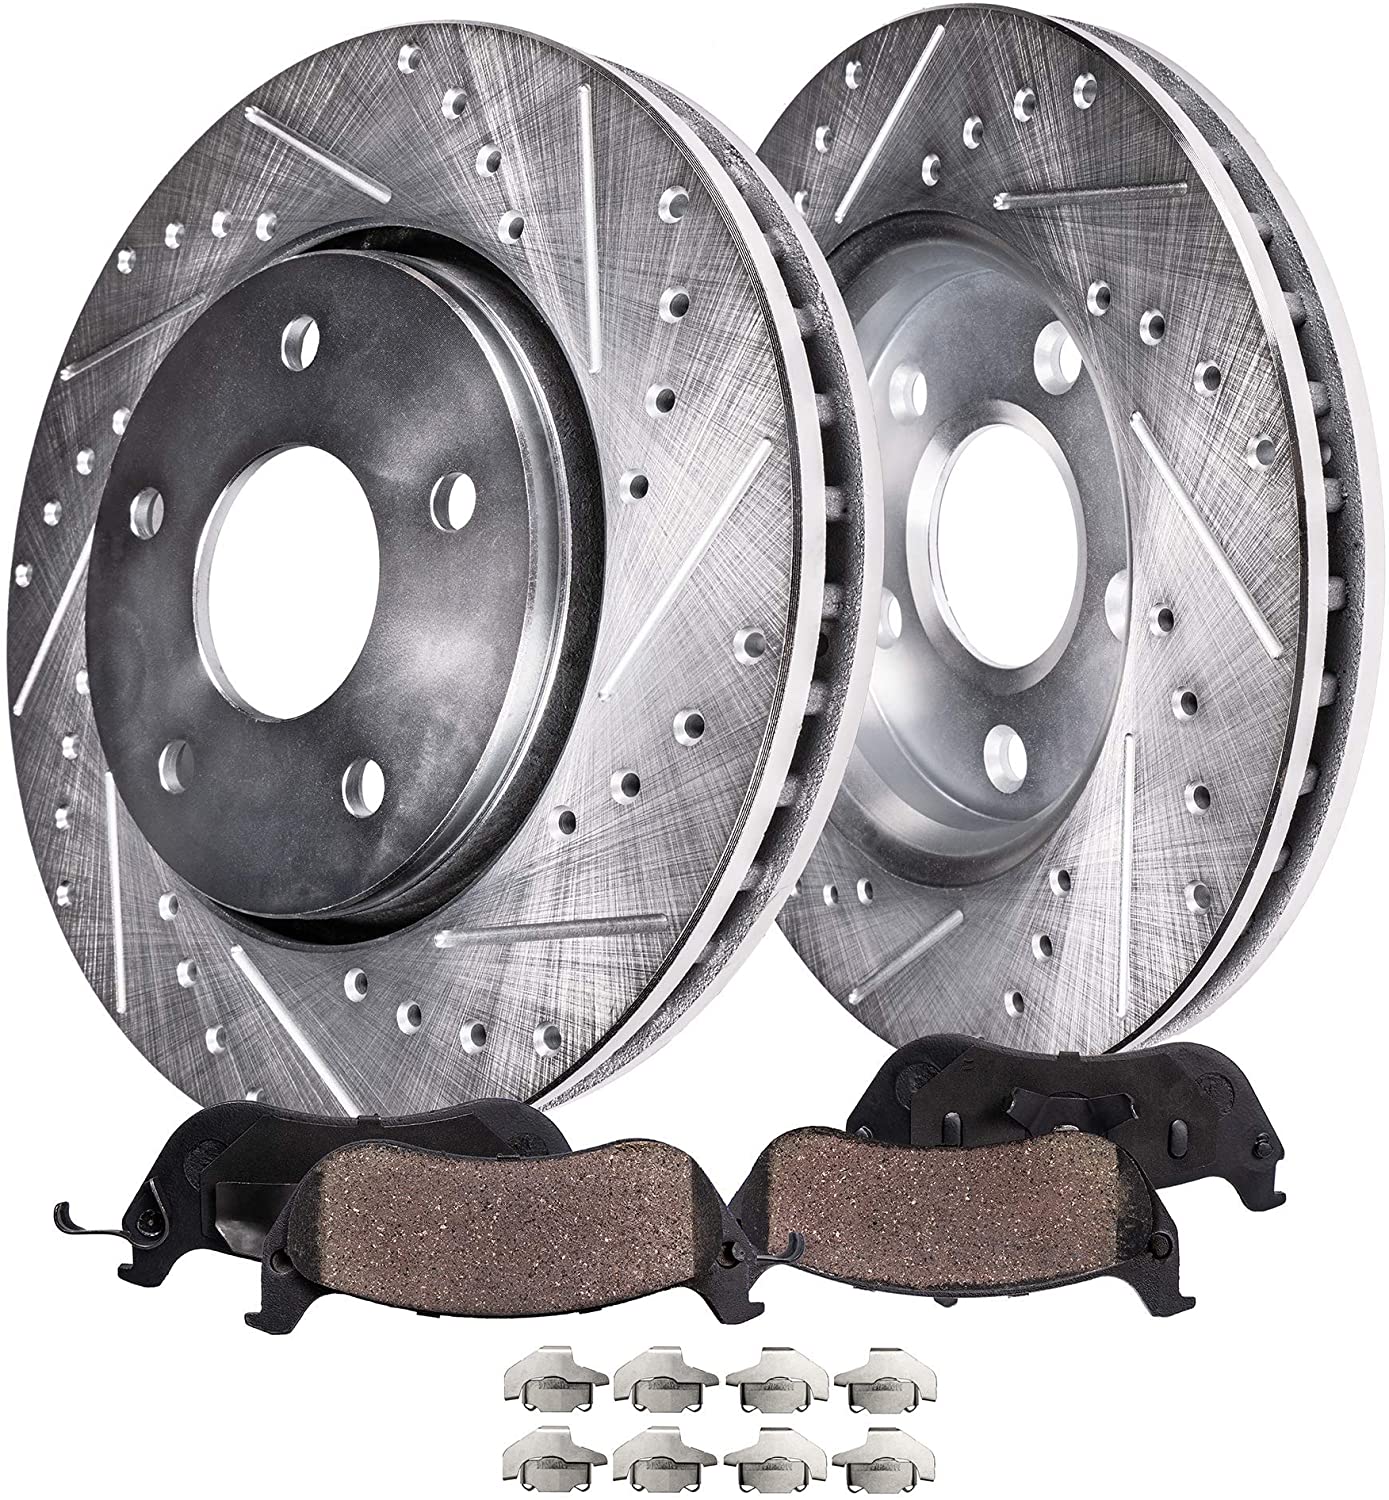 Detroit Axle - REAR Drilled & Slotted Disc Brake Kit Rotors & Ceramic Pads w/Clips Hardware Replacement for 5-LUG 2005-2016 Dodge Ram 1500 - [2005-2009 Dodge Durango] - 2007-2009 Aspen